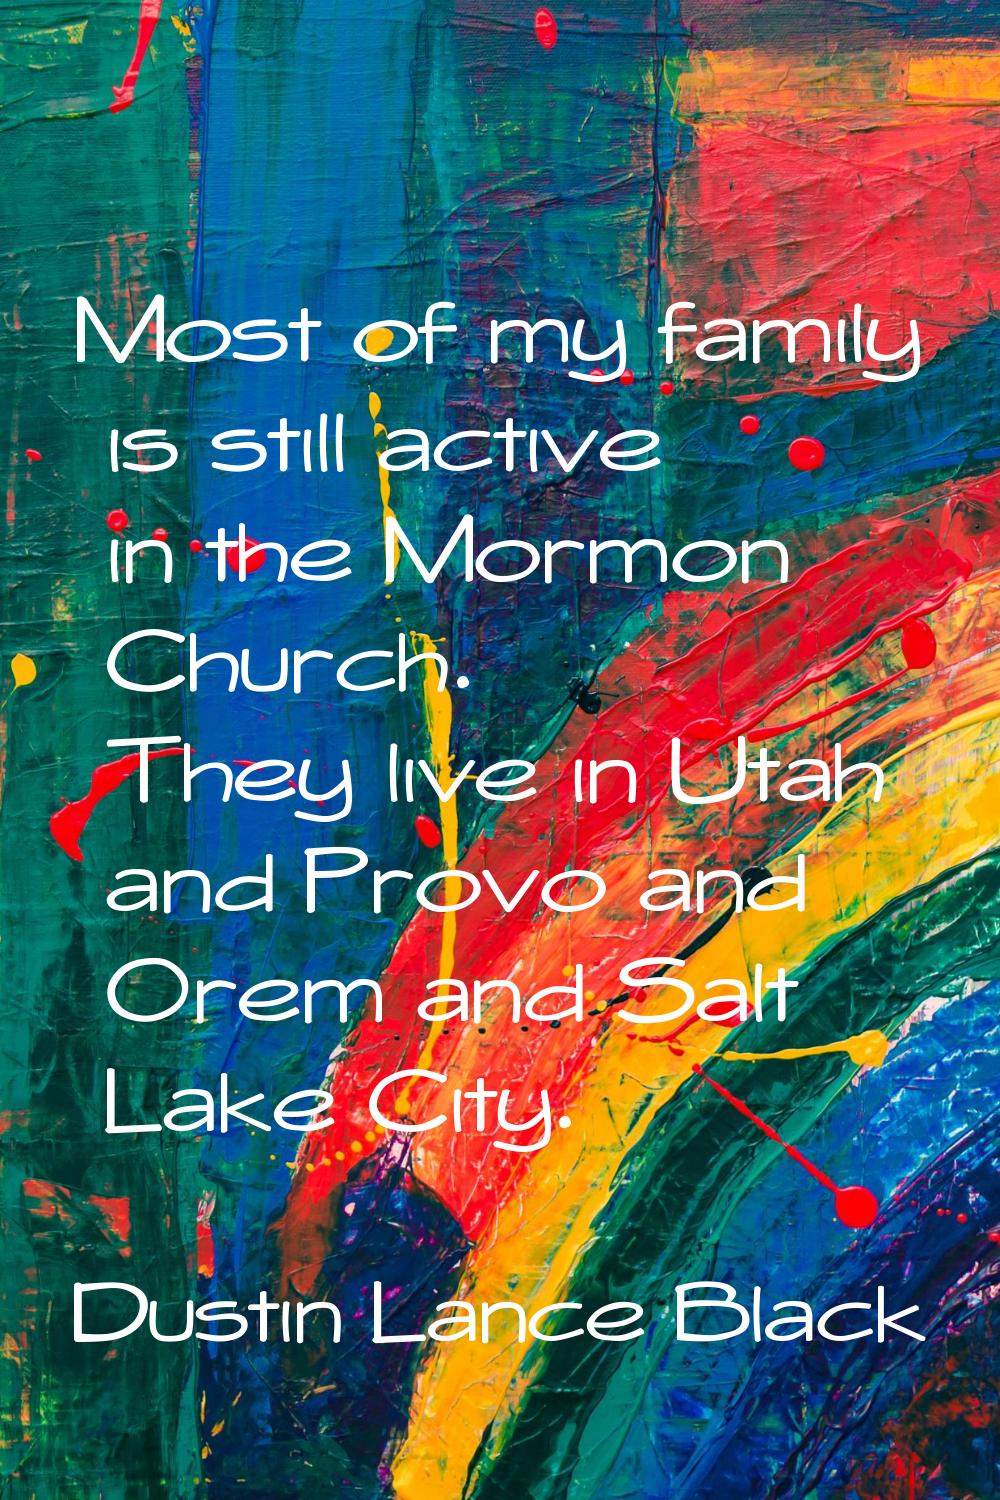 Most of my family is still active in the Mormon Church. They live in Utah and Provo and Orem and Sa